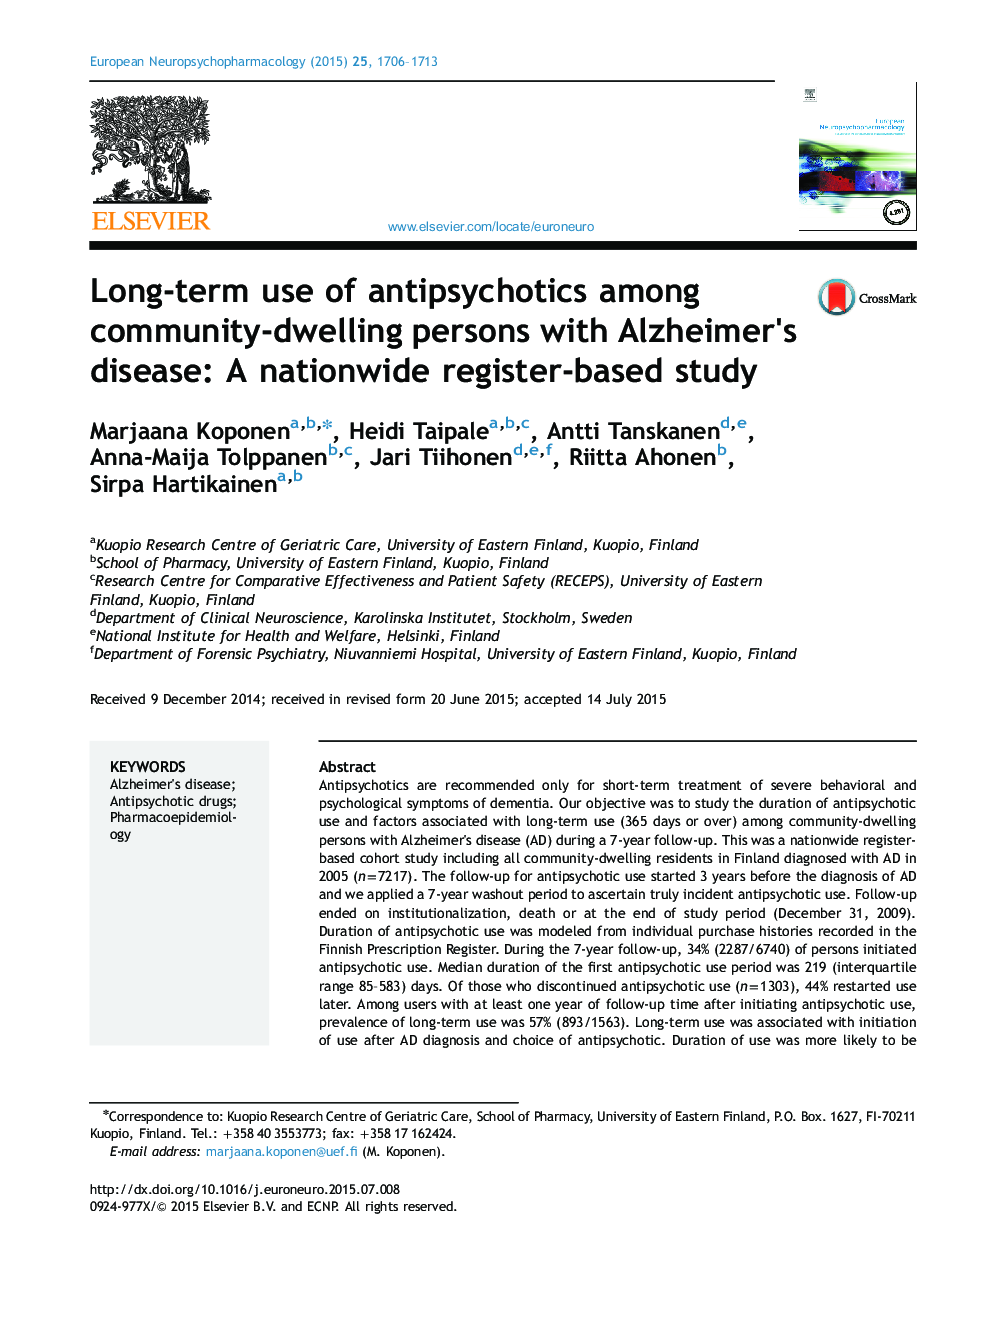 Long-term use of antipsychotics among community-dwelling persons with Alzheimer×³s disease: A nationwide register-based study